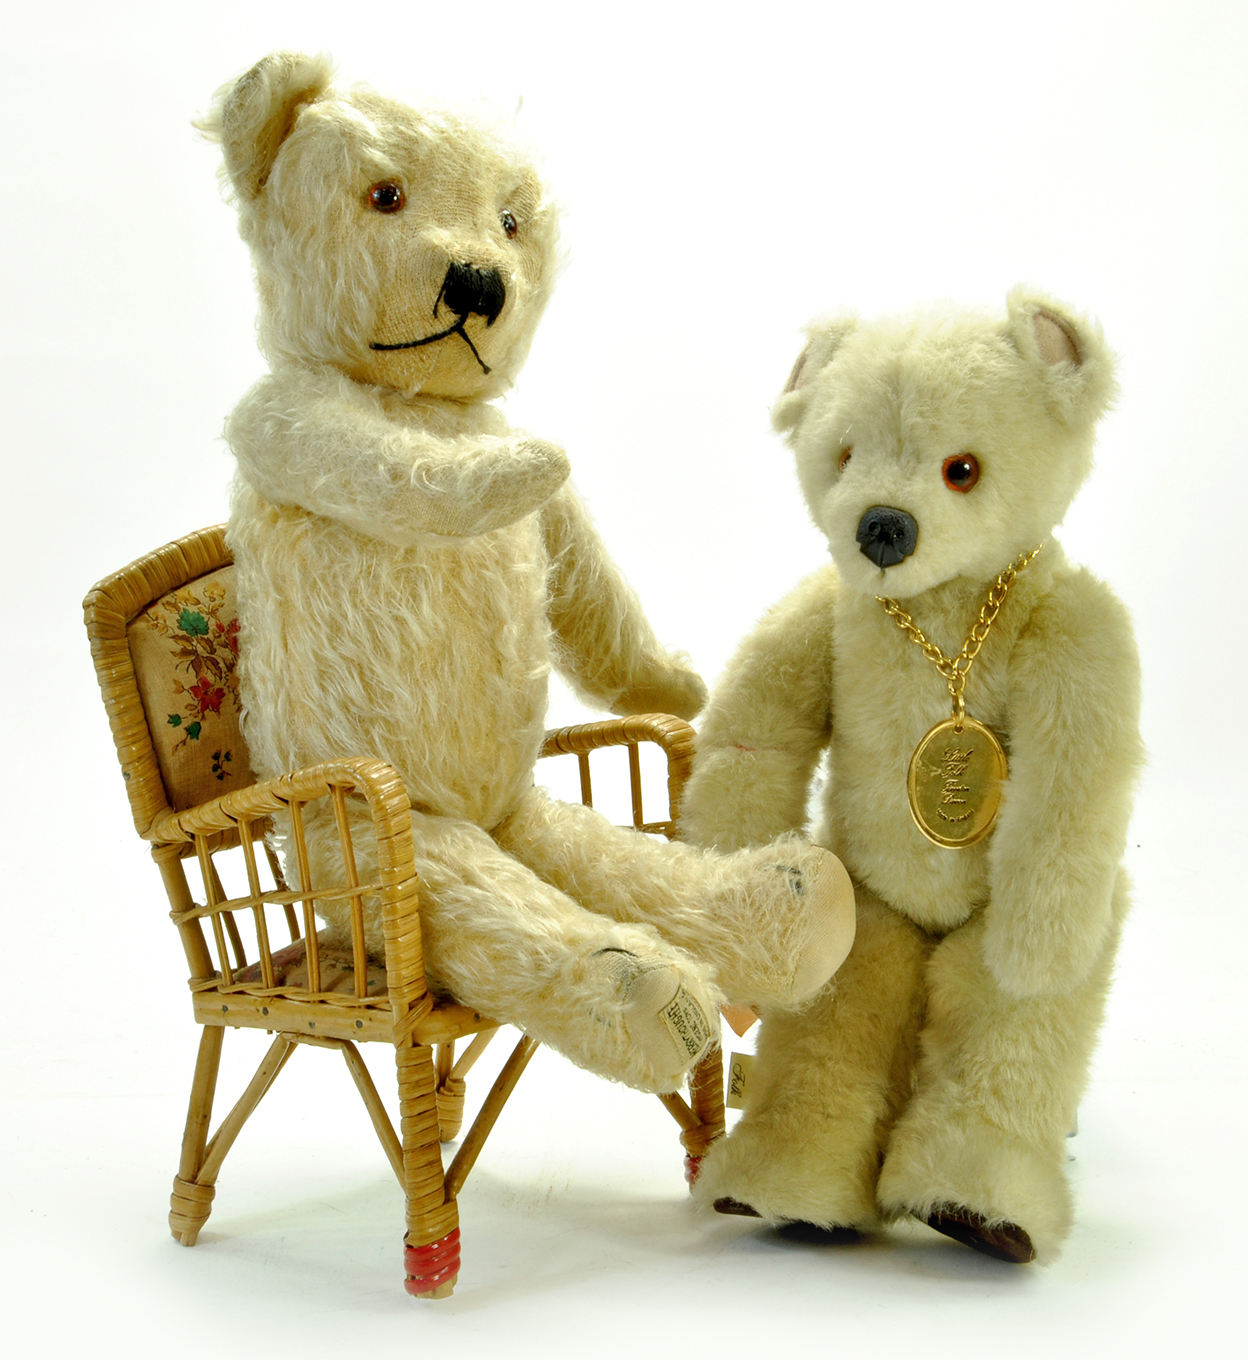 Little Folk Teddy plus Vintage Merrythought, 1930's Bear with woven label to right foot. 16" tall.